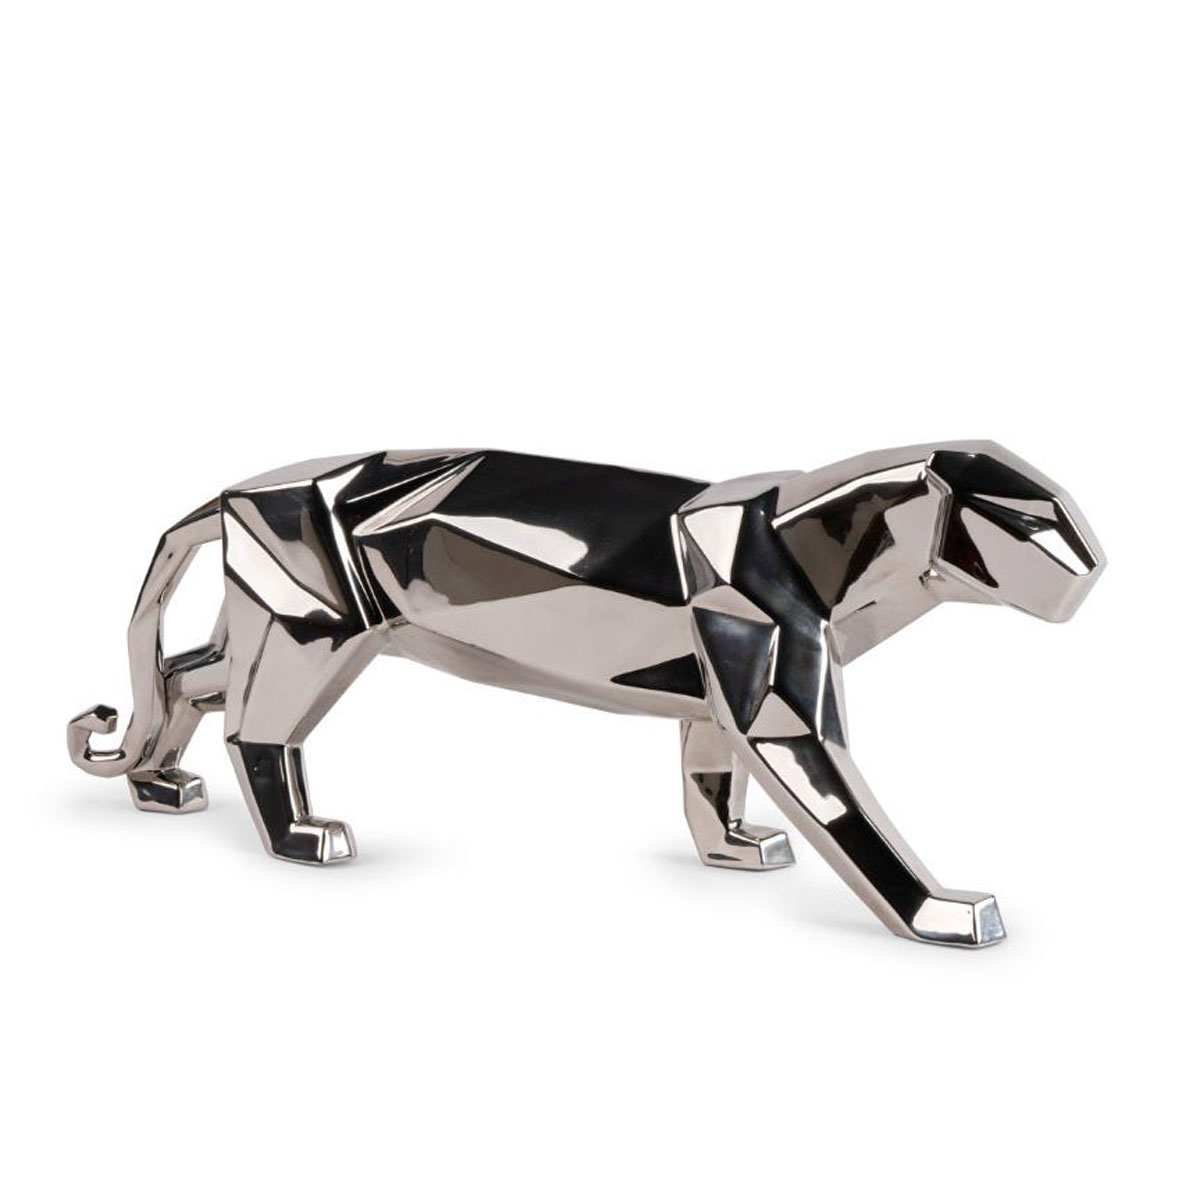 Lladro Panther, Silver